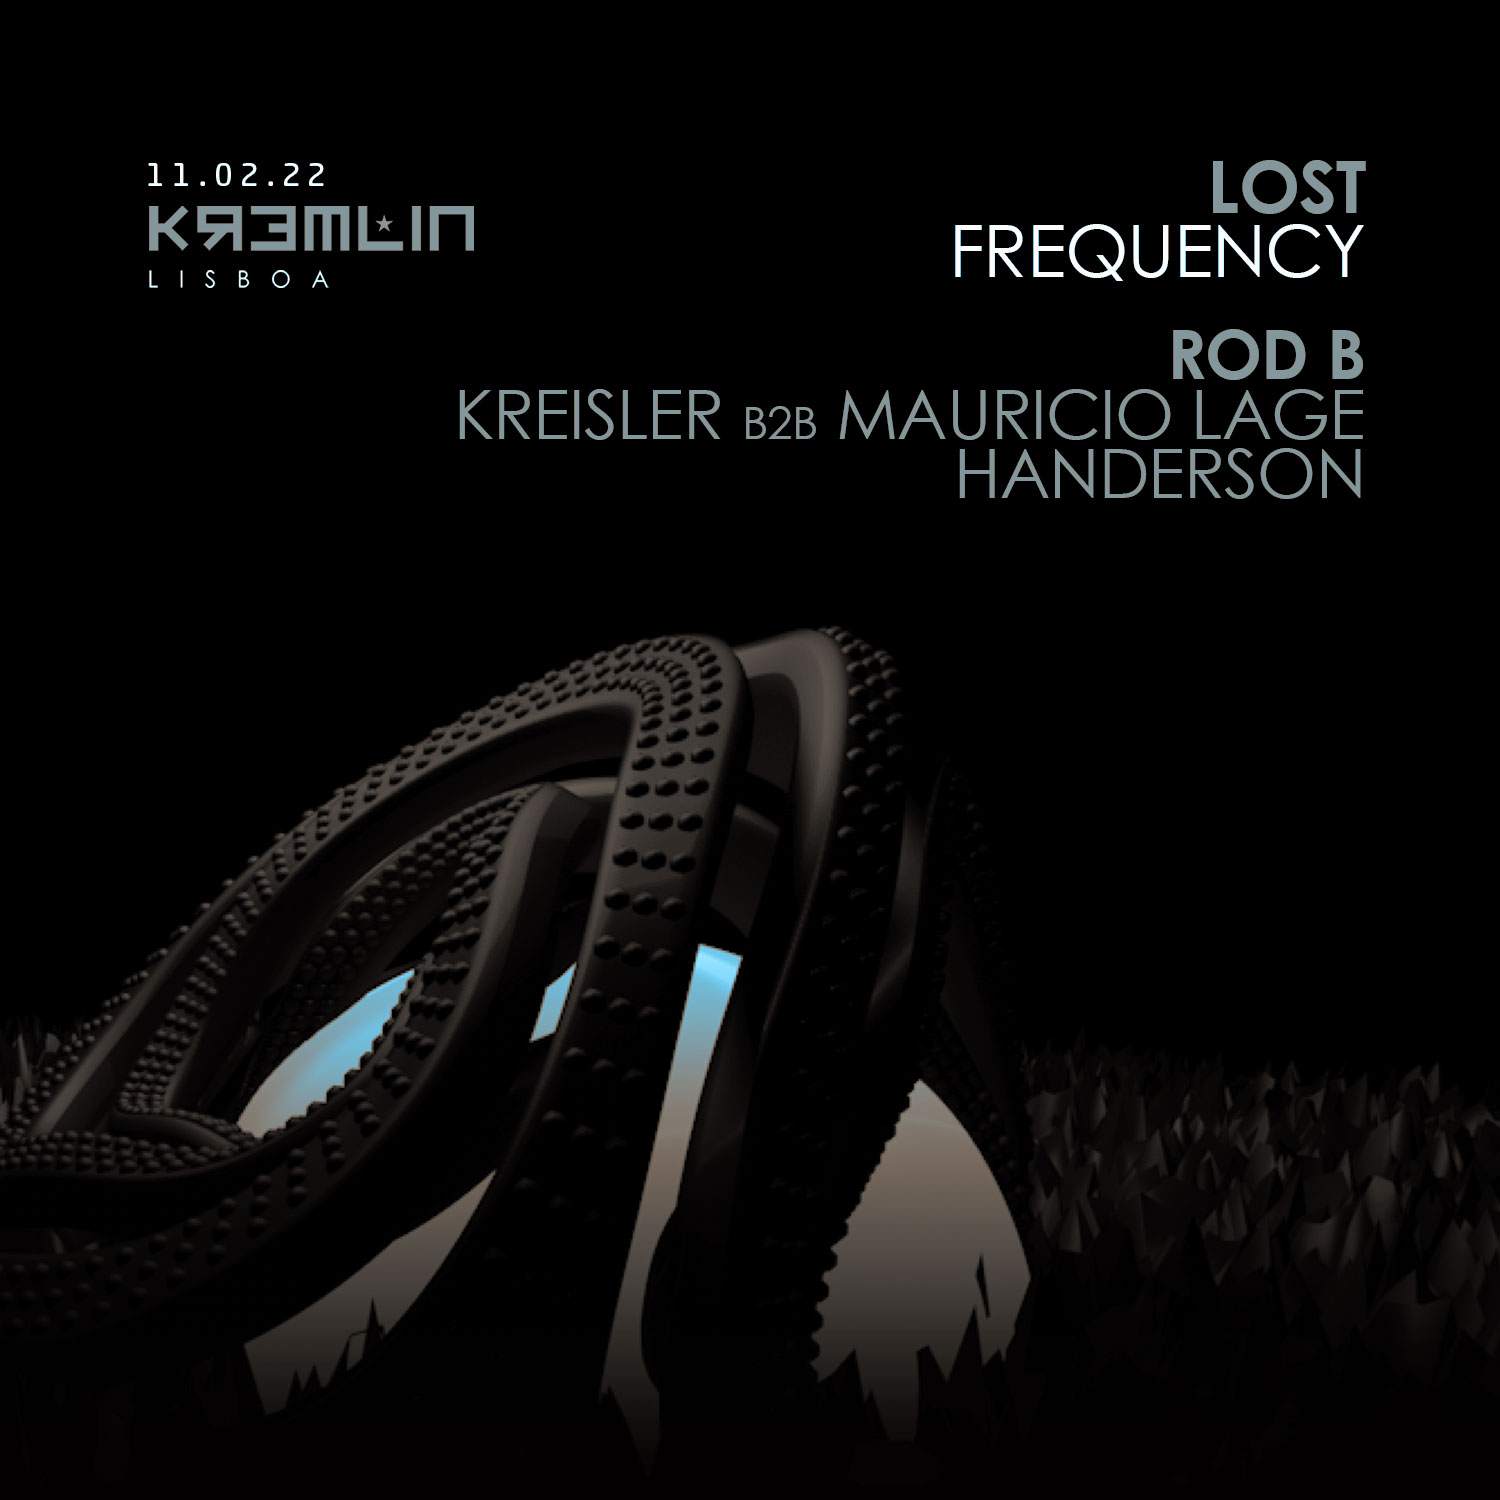 Lost Frequency with Rod B - フライヤー表